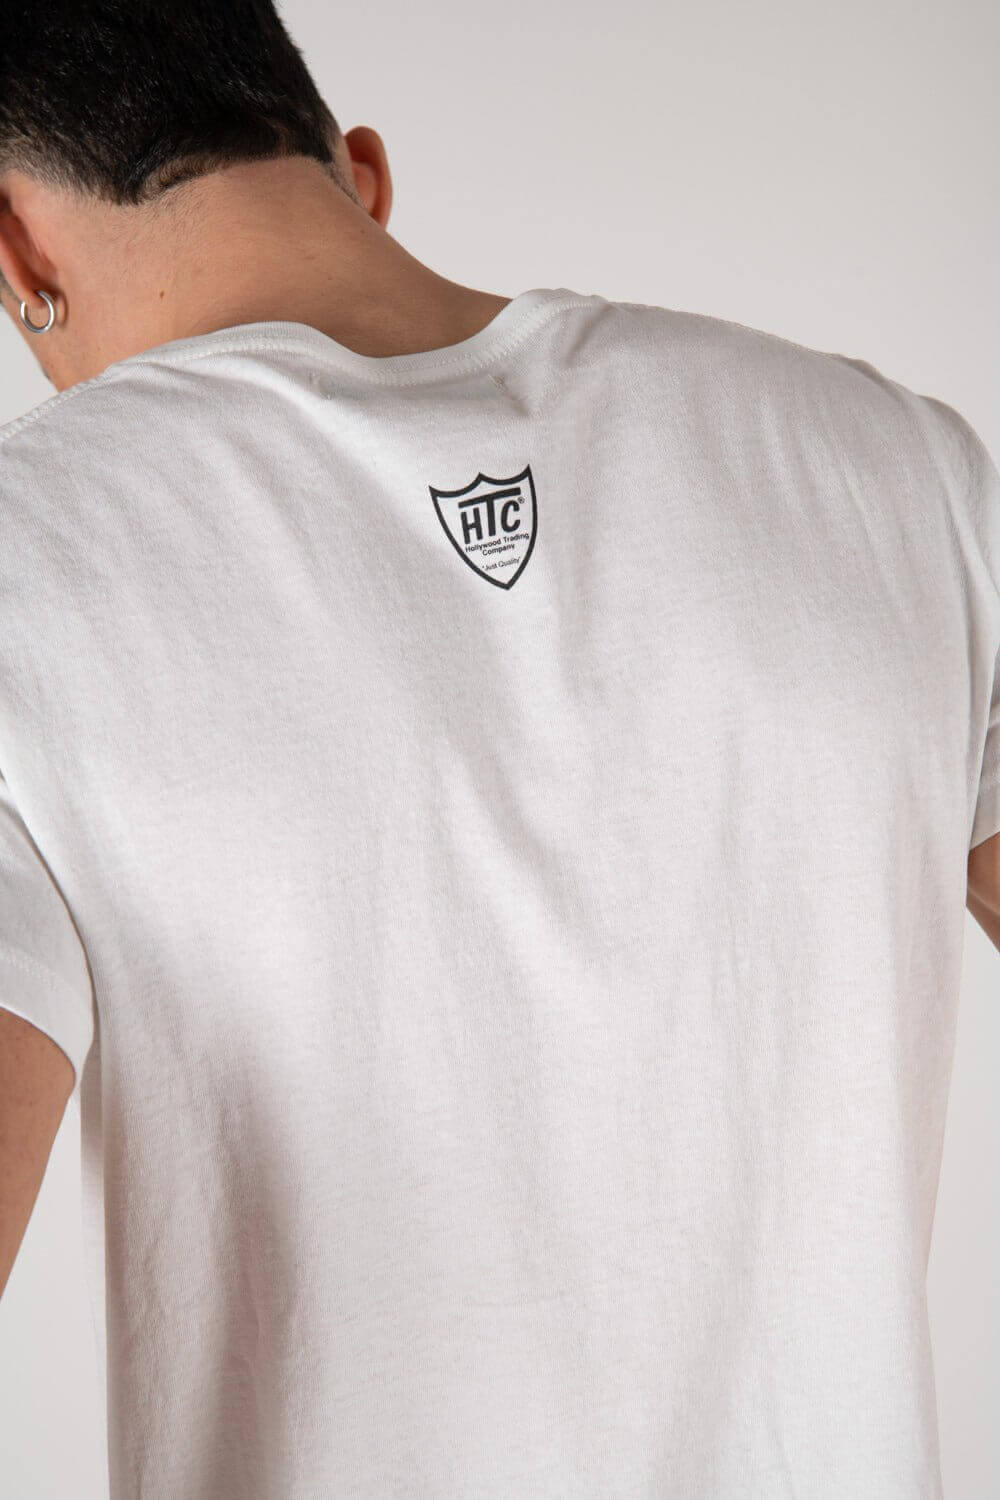 HTC LOGO SLIM Slim fit t-shirt with printed shield logo on the front. Composition: 100% Cotton HTC LOS ANGELES